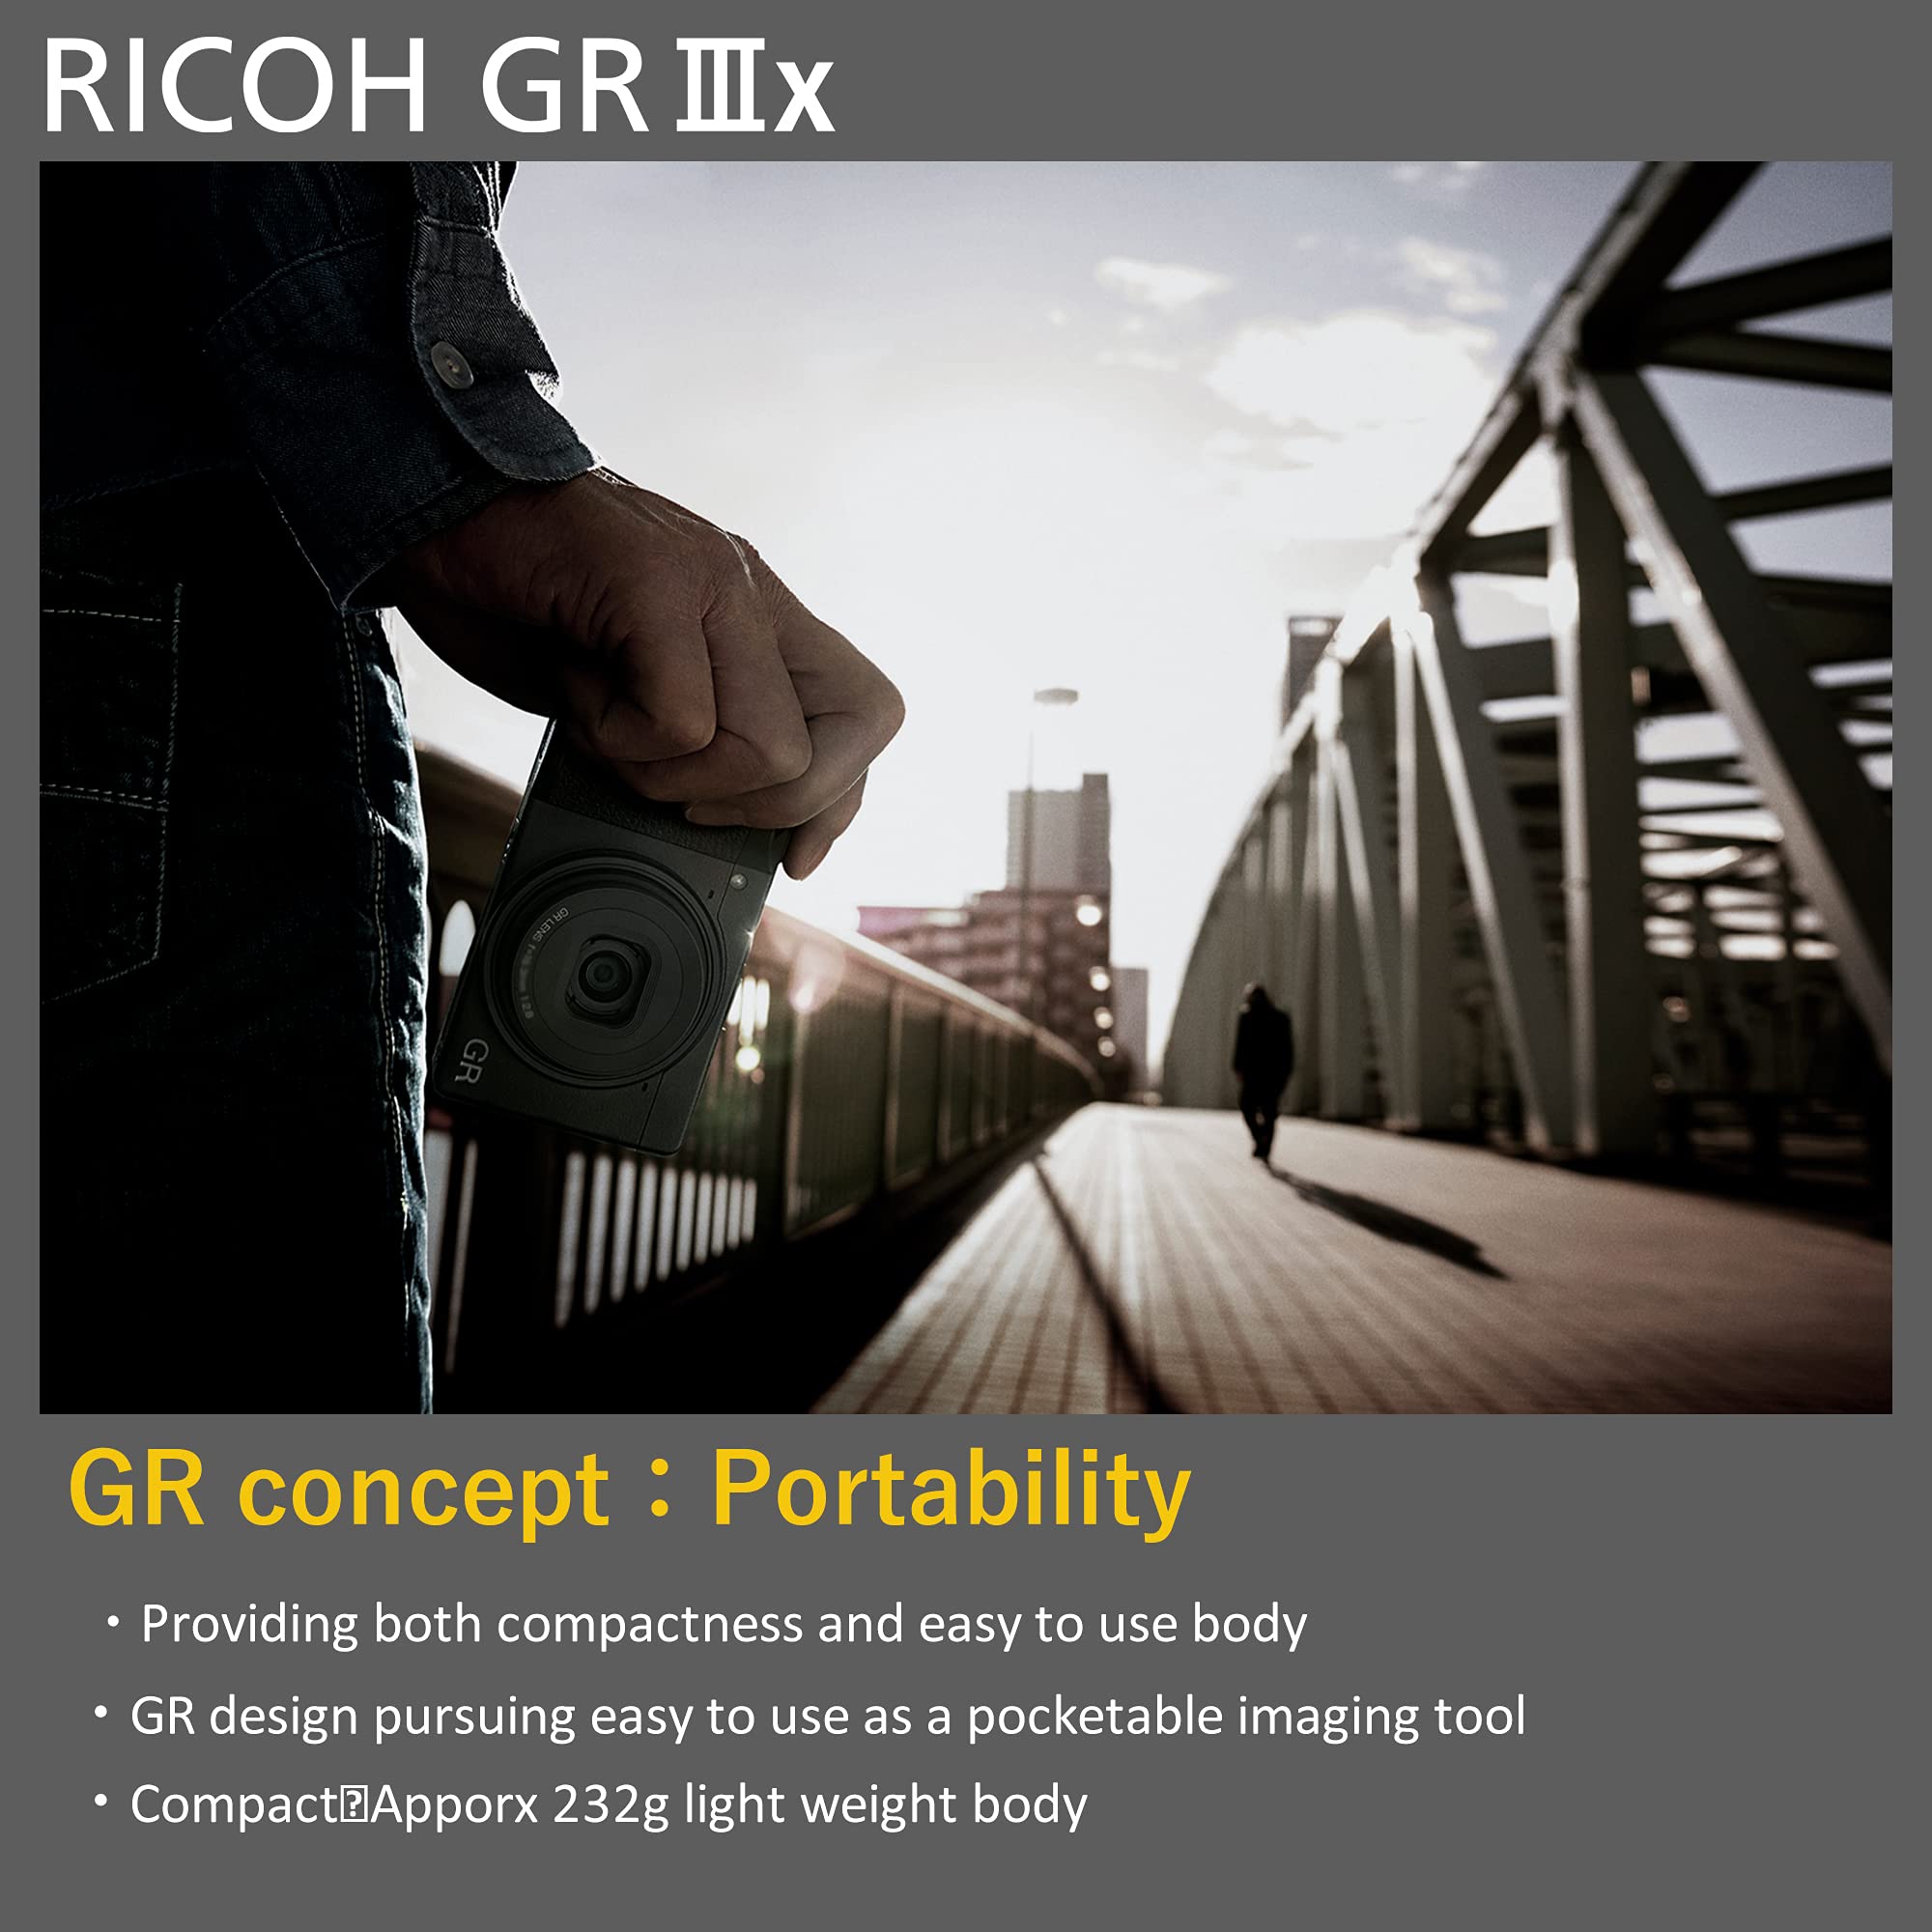 Ricoh GR IIIx Digital Camera [Focal length 40mm] [Equipped with24.2M APS-C size large CMOS sensor ] [The ultimate snapshot camera] [Approximately 0.8 seconds high-speed startup] [High speed hybrid AF]